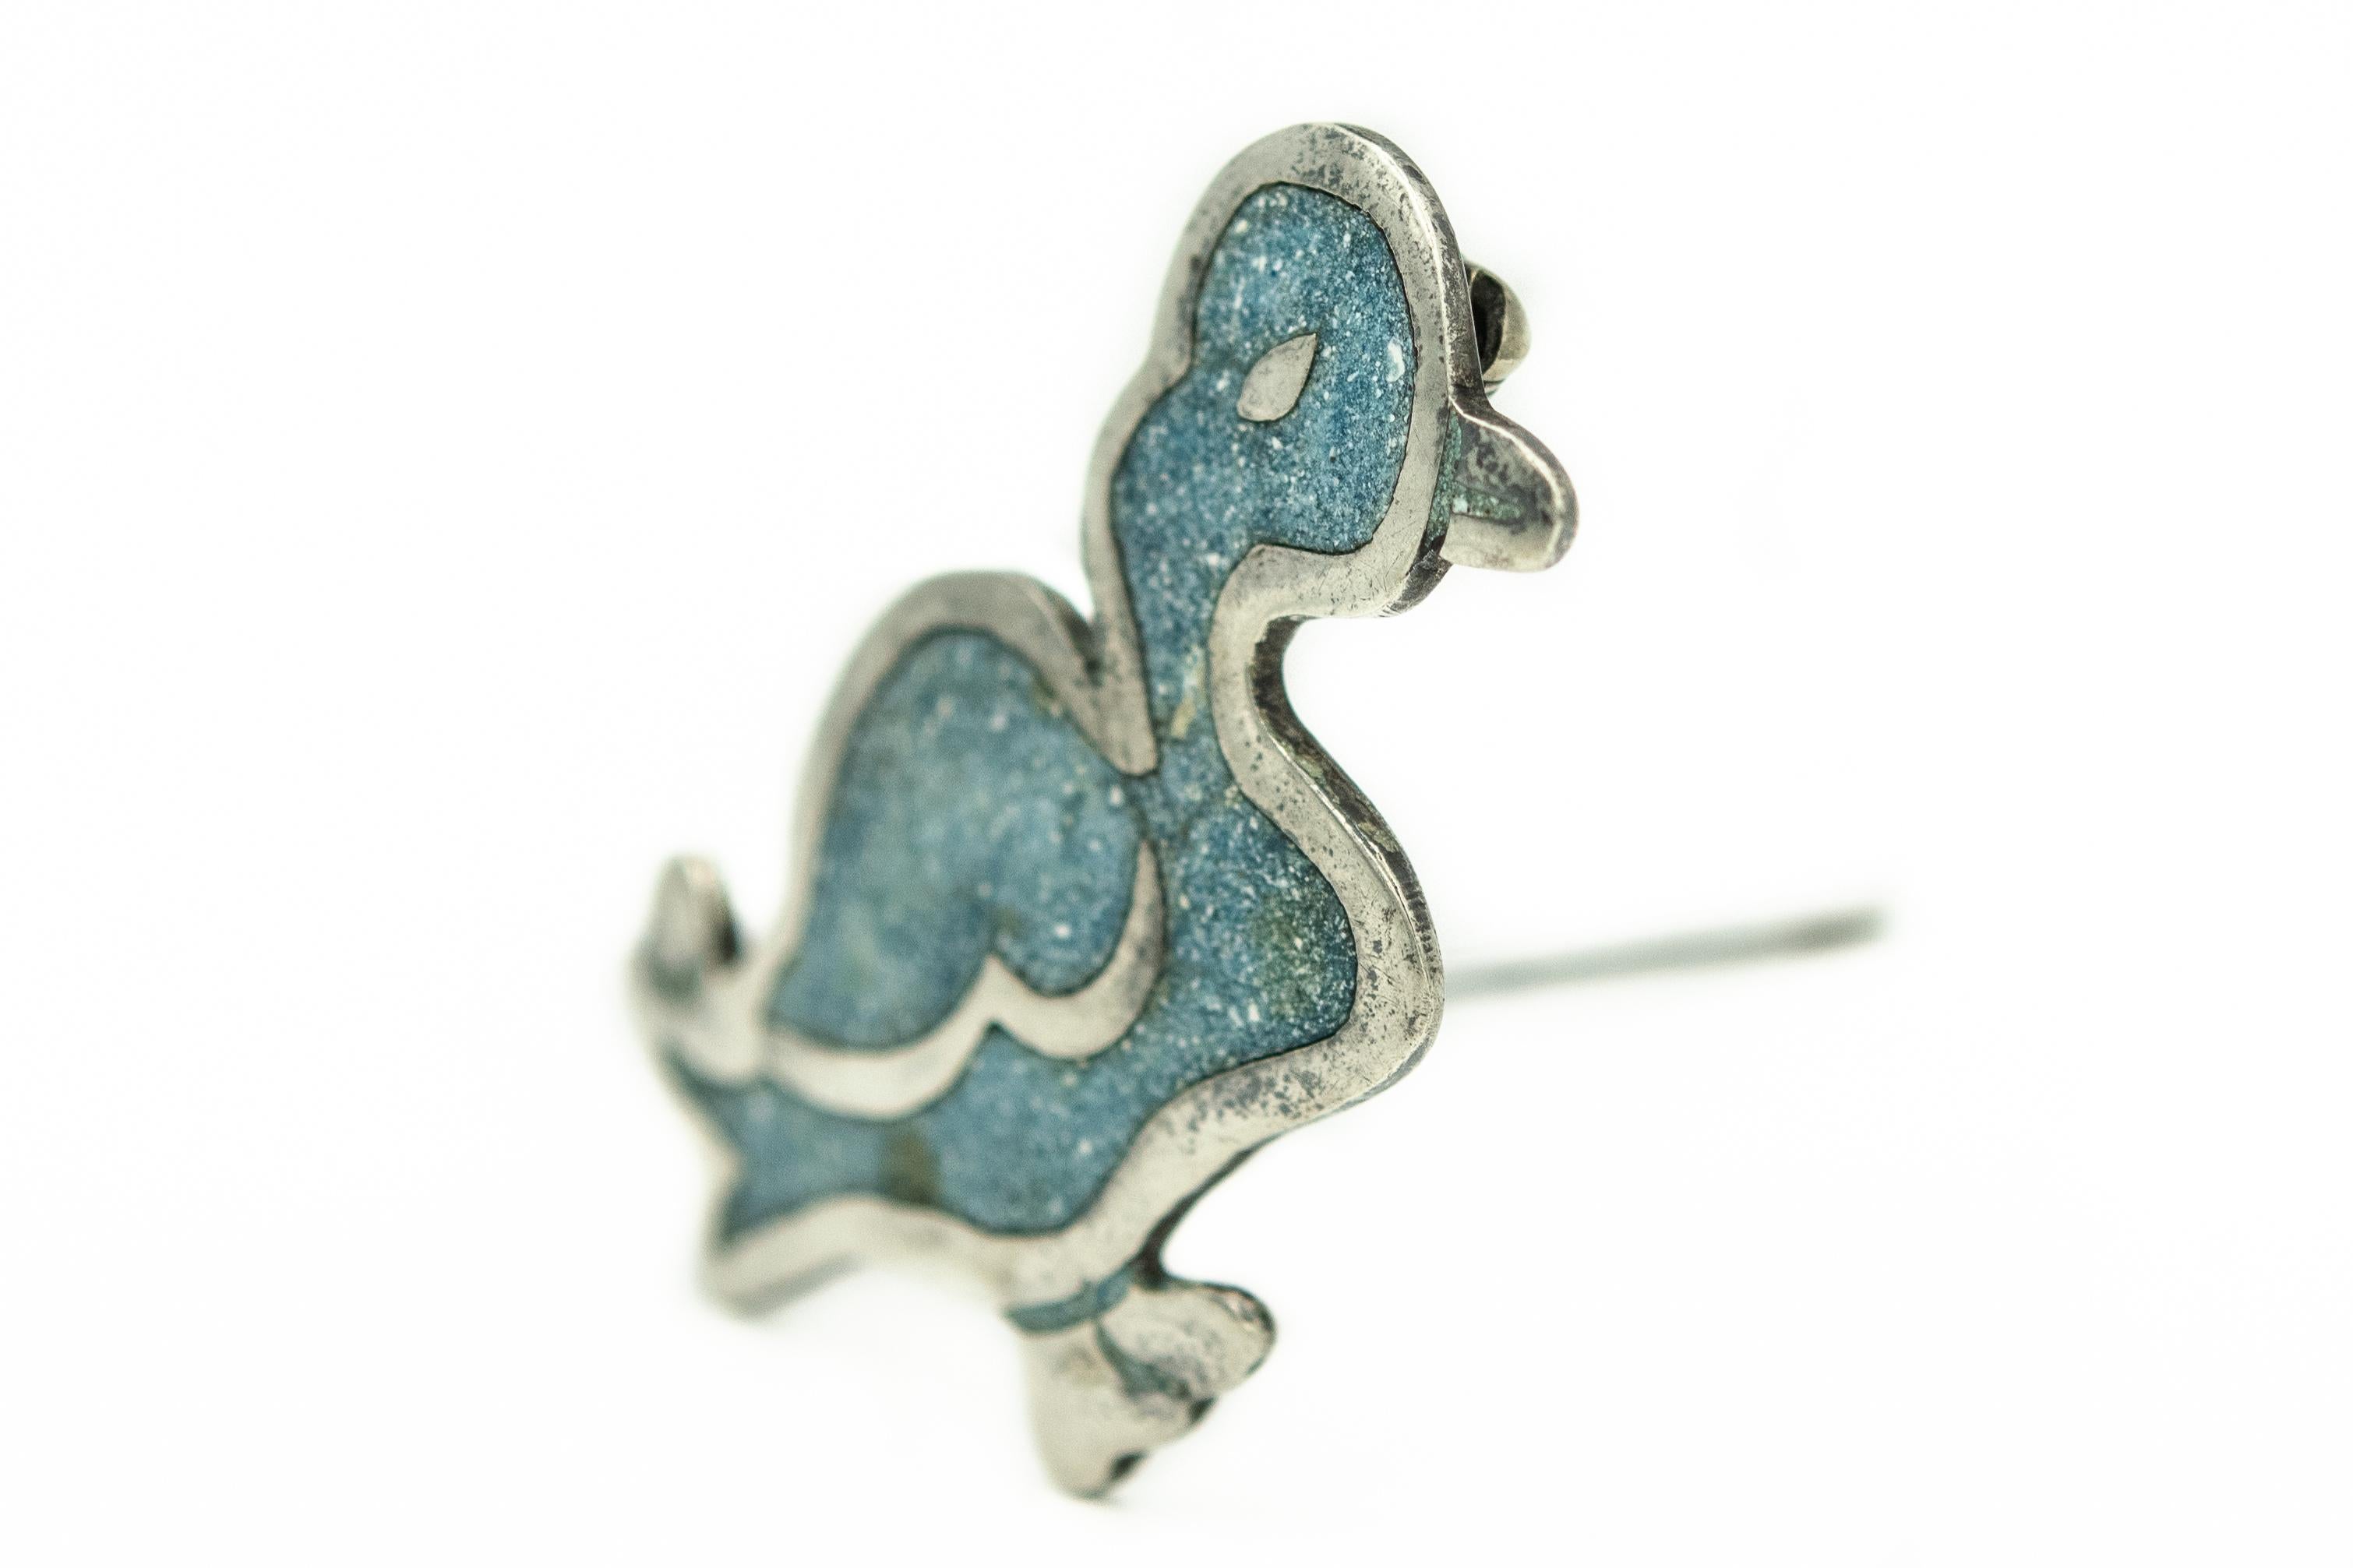 Hand wrought sterling silver duck brooch pendant with centrally set finely crushed, turquoise inlay.
HALLMARKS: TAXCO, MEXICO (circle), B (inside circle); STERLING; 925 with an Eagle assay stamp

In the 1930's, American-born Bernice I. Goodspeed